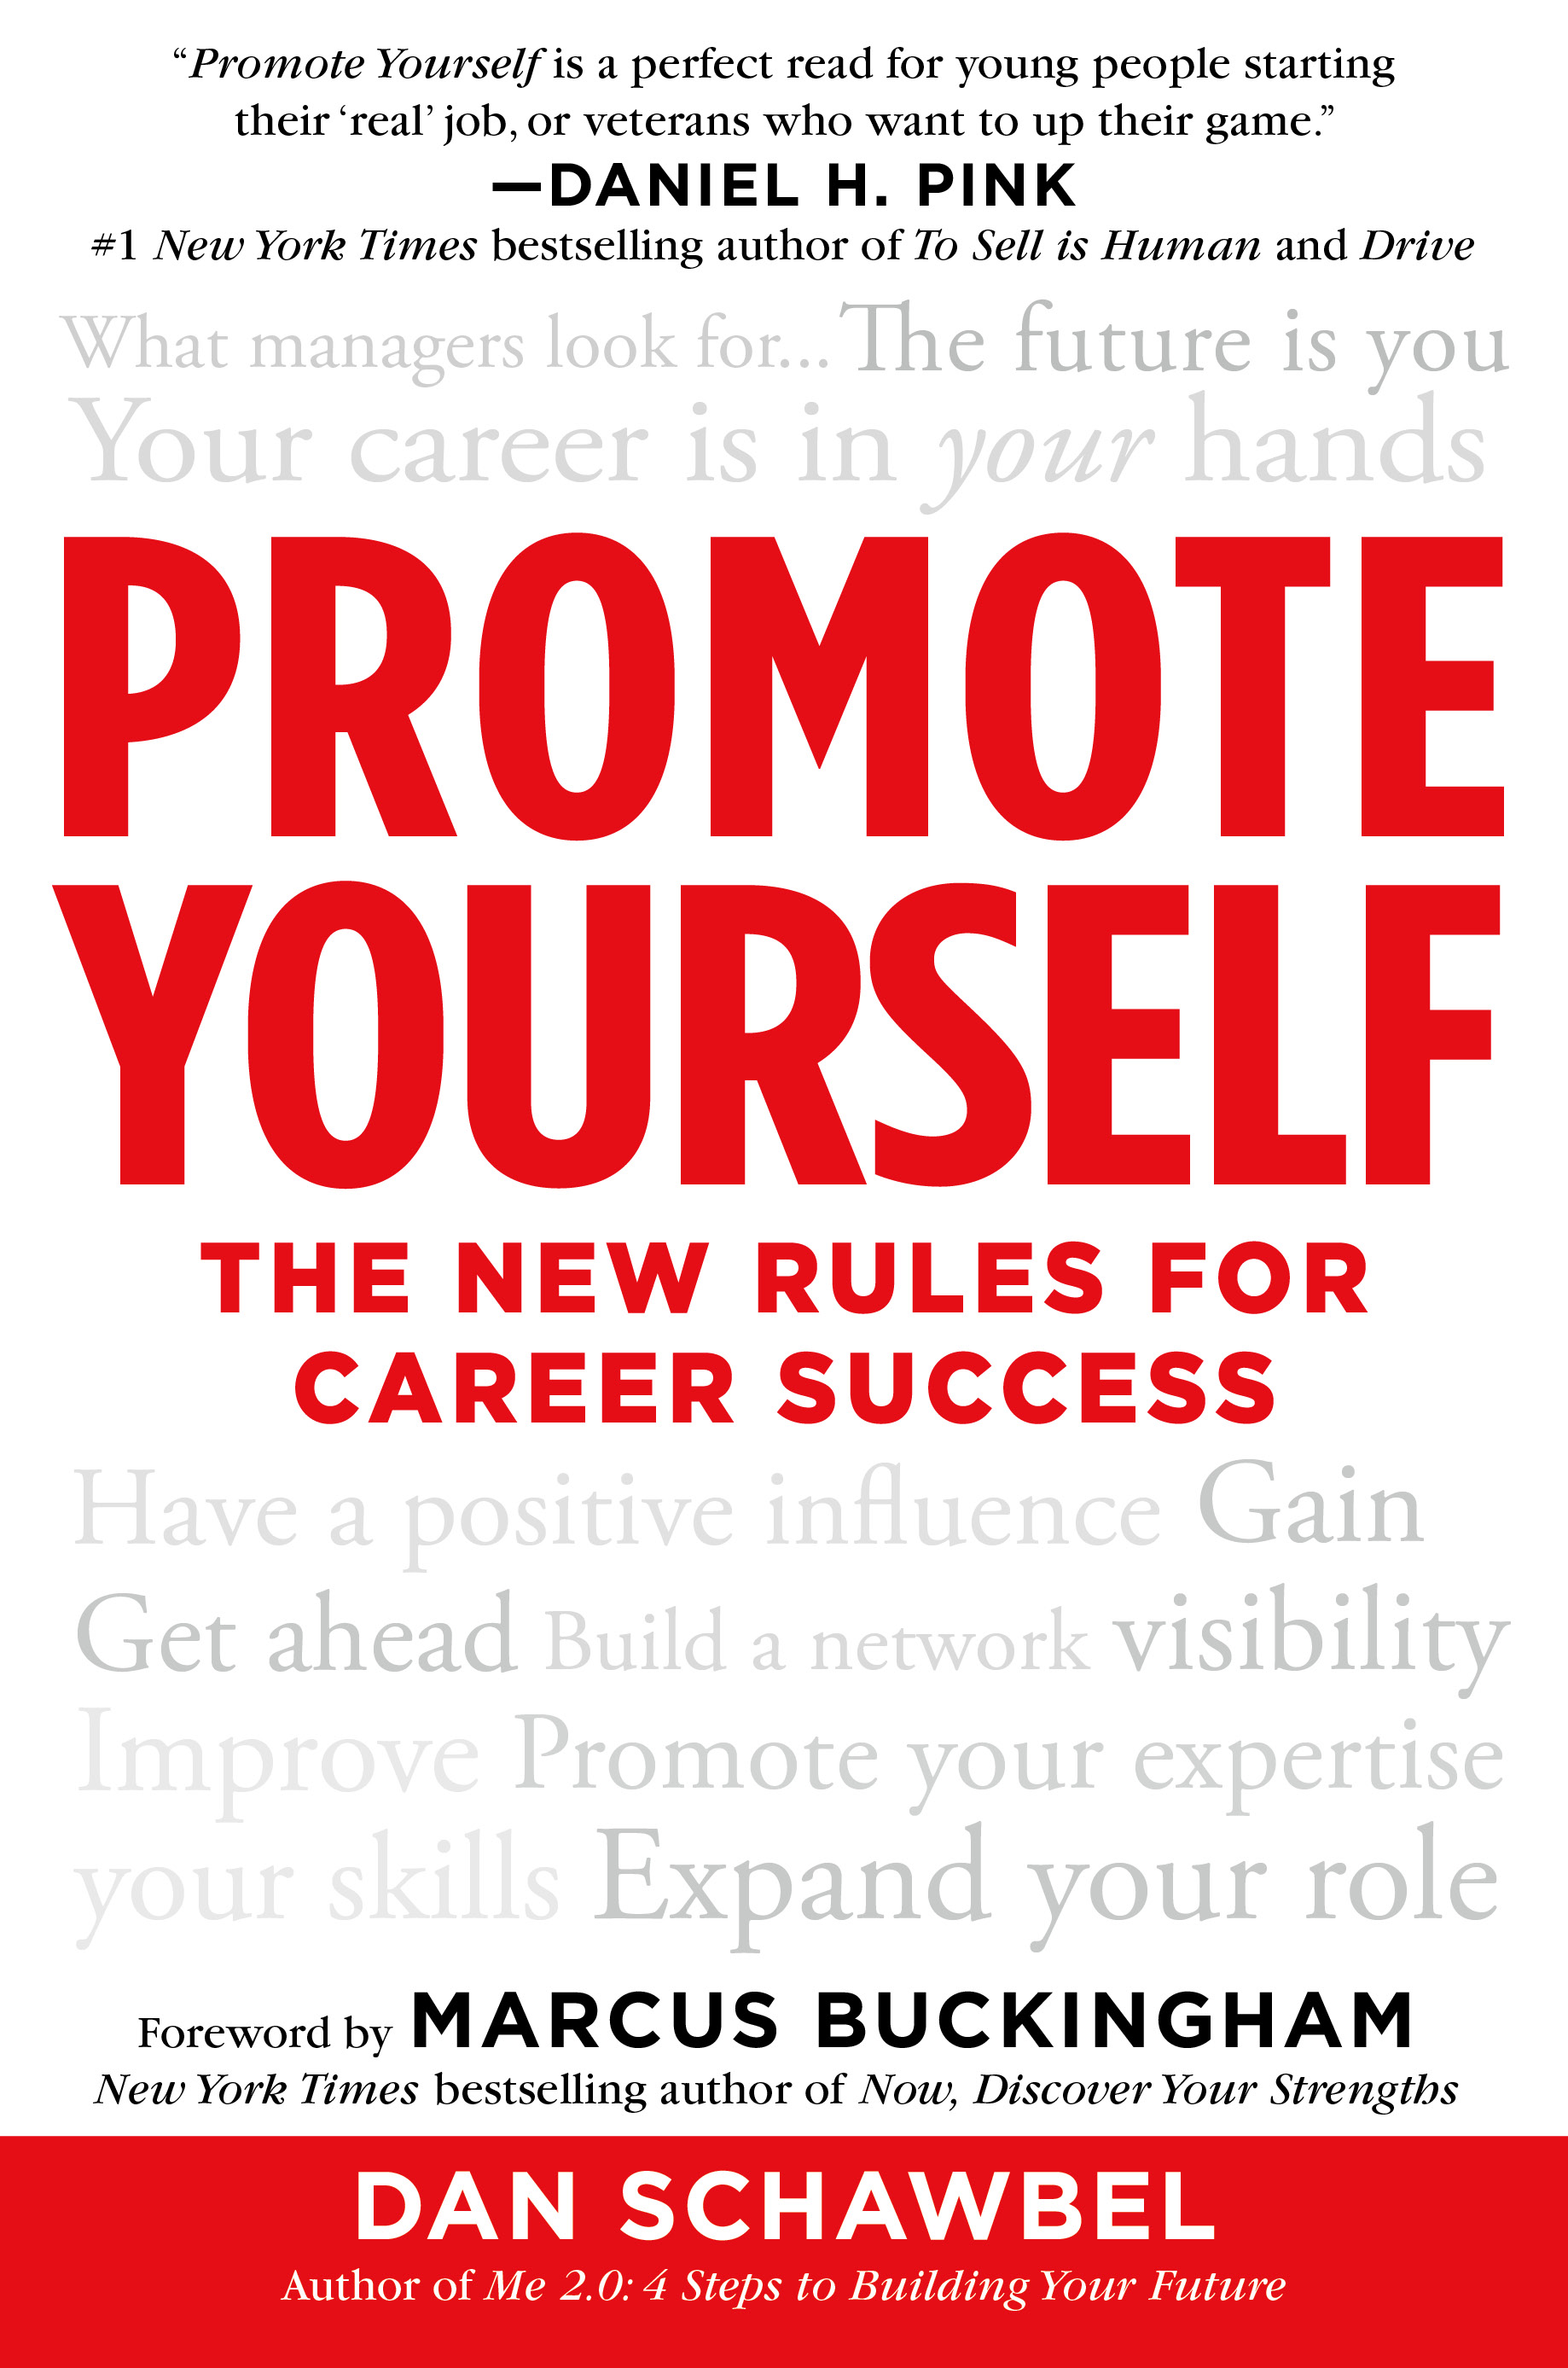 Promote-Yourself-The-New-Rules-for-Career-Success